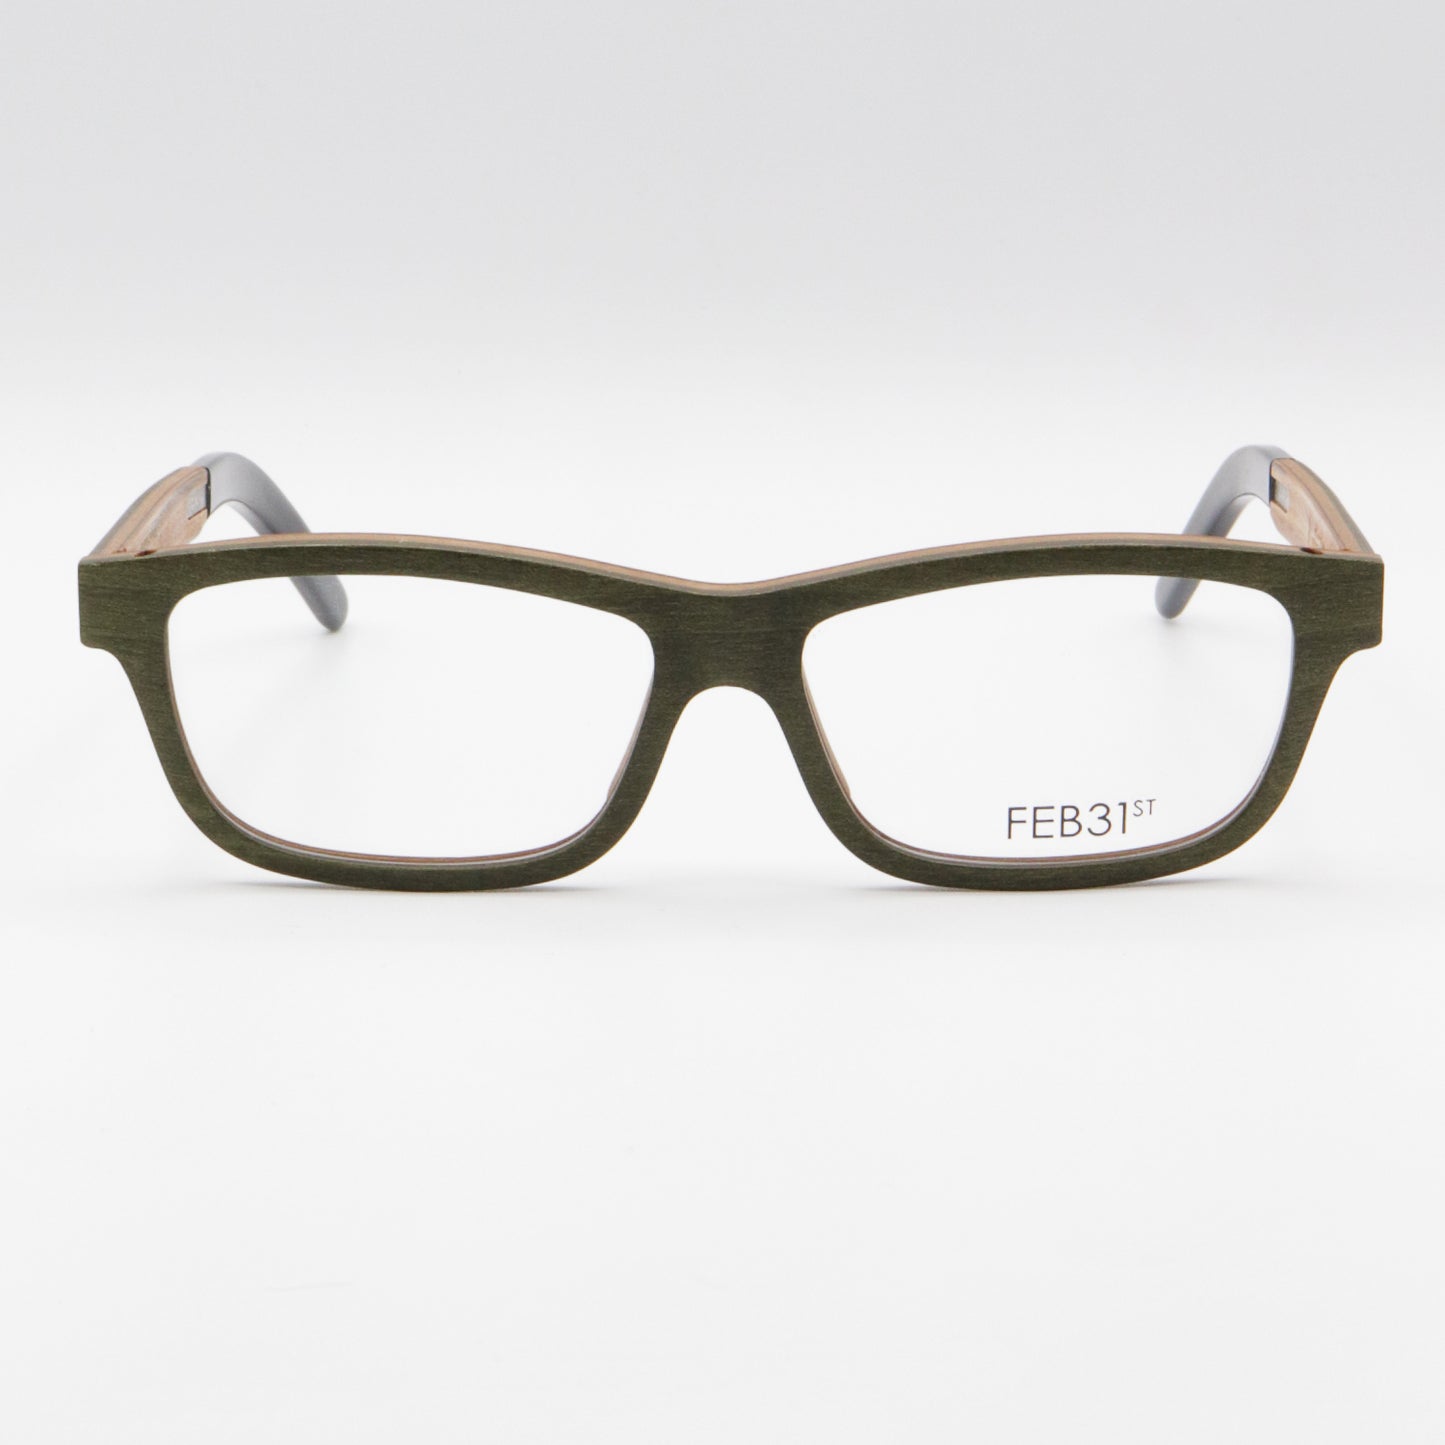 Apus Air by FEB31st wooden glasses Green and Beige